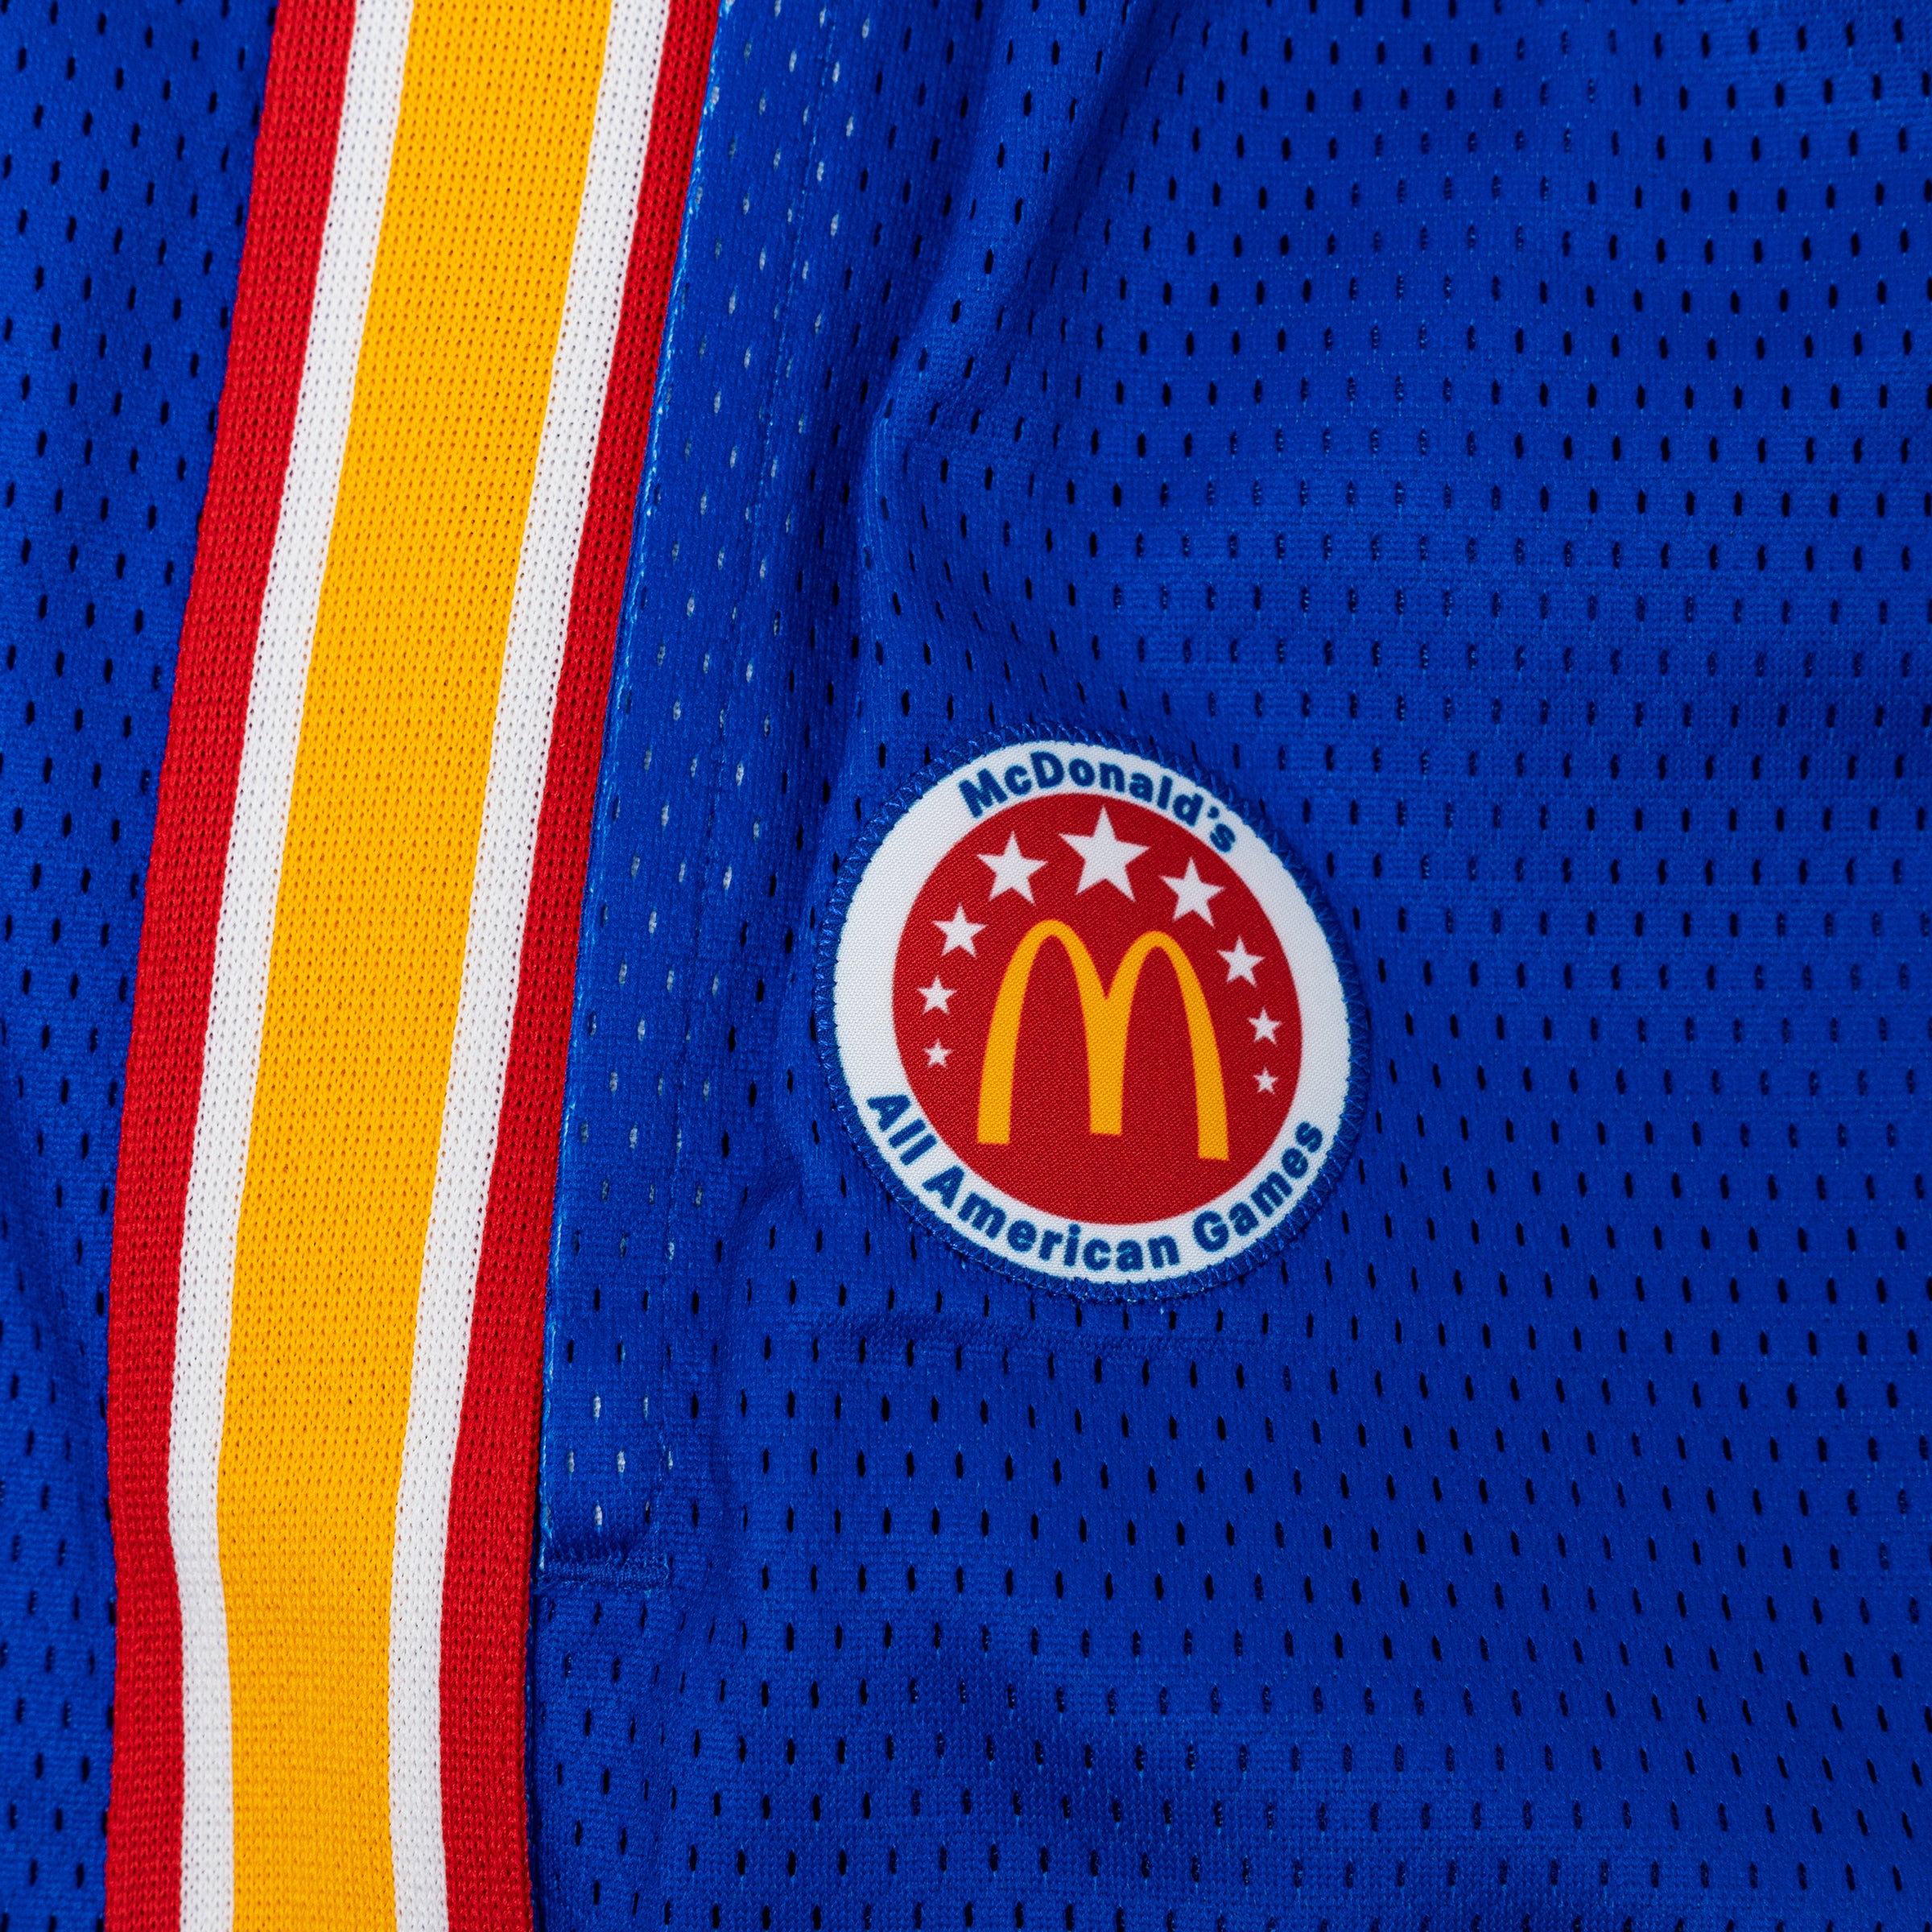 McDonald's All American Games Unveils New Jersey Designs From Eric Emanuel  and Adidas